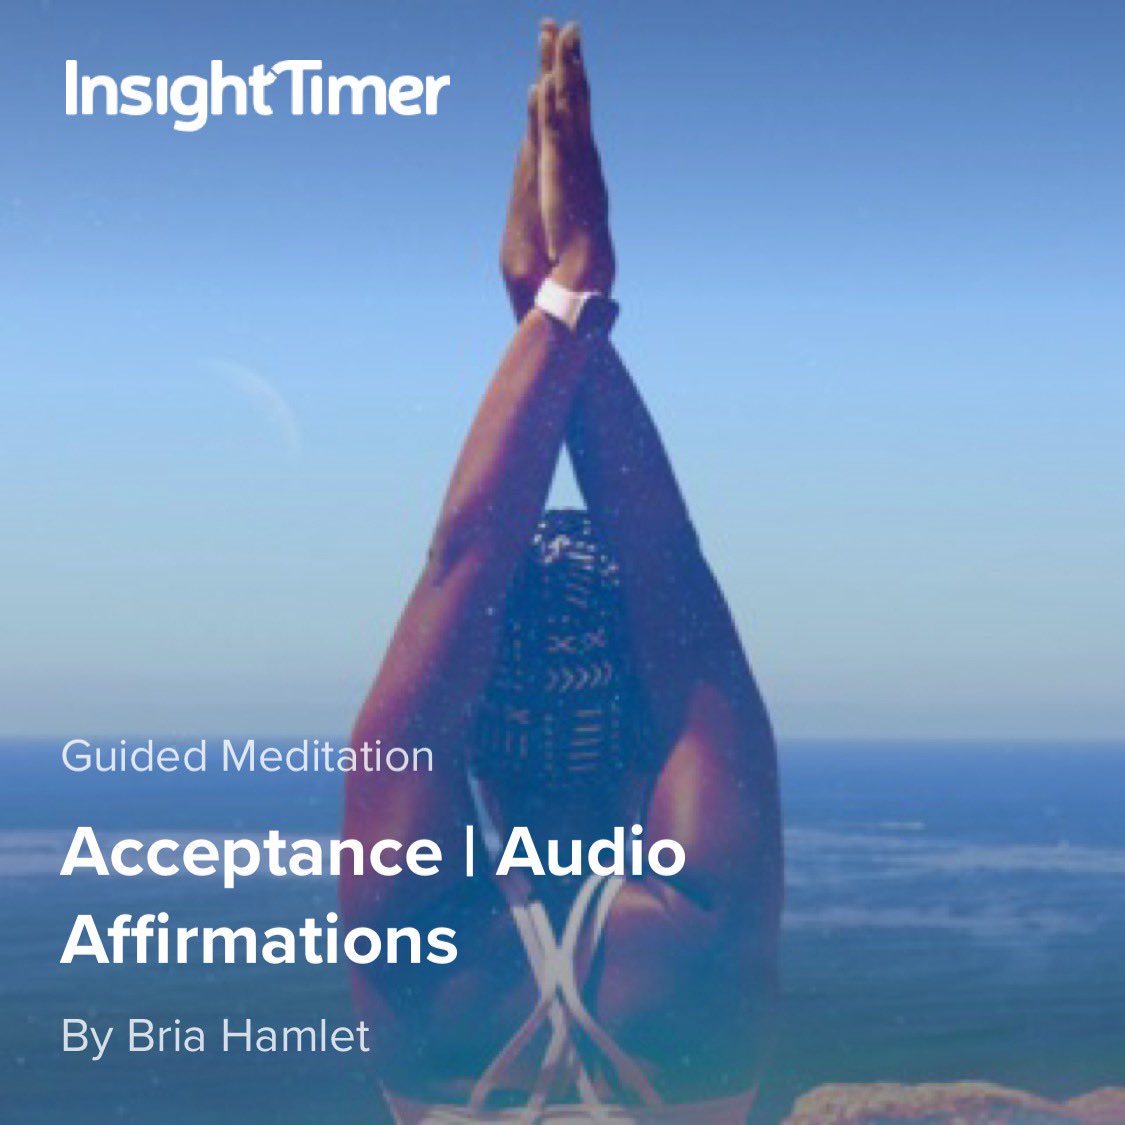 My Acceptance Meditation is now live on @InsightTimer! Go check it out. 🙏🏾✨